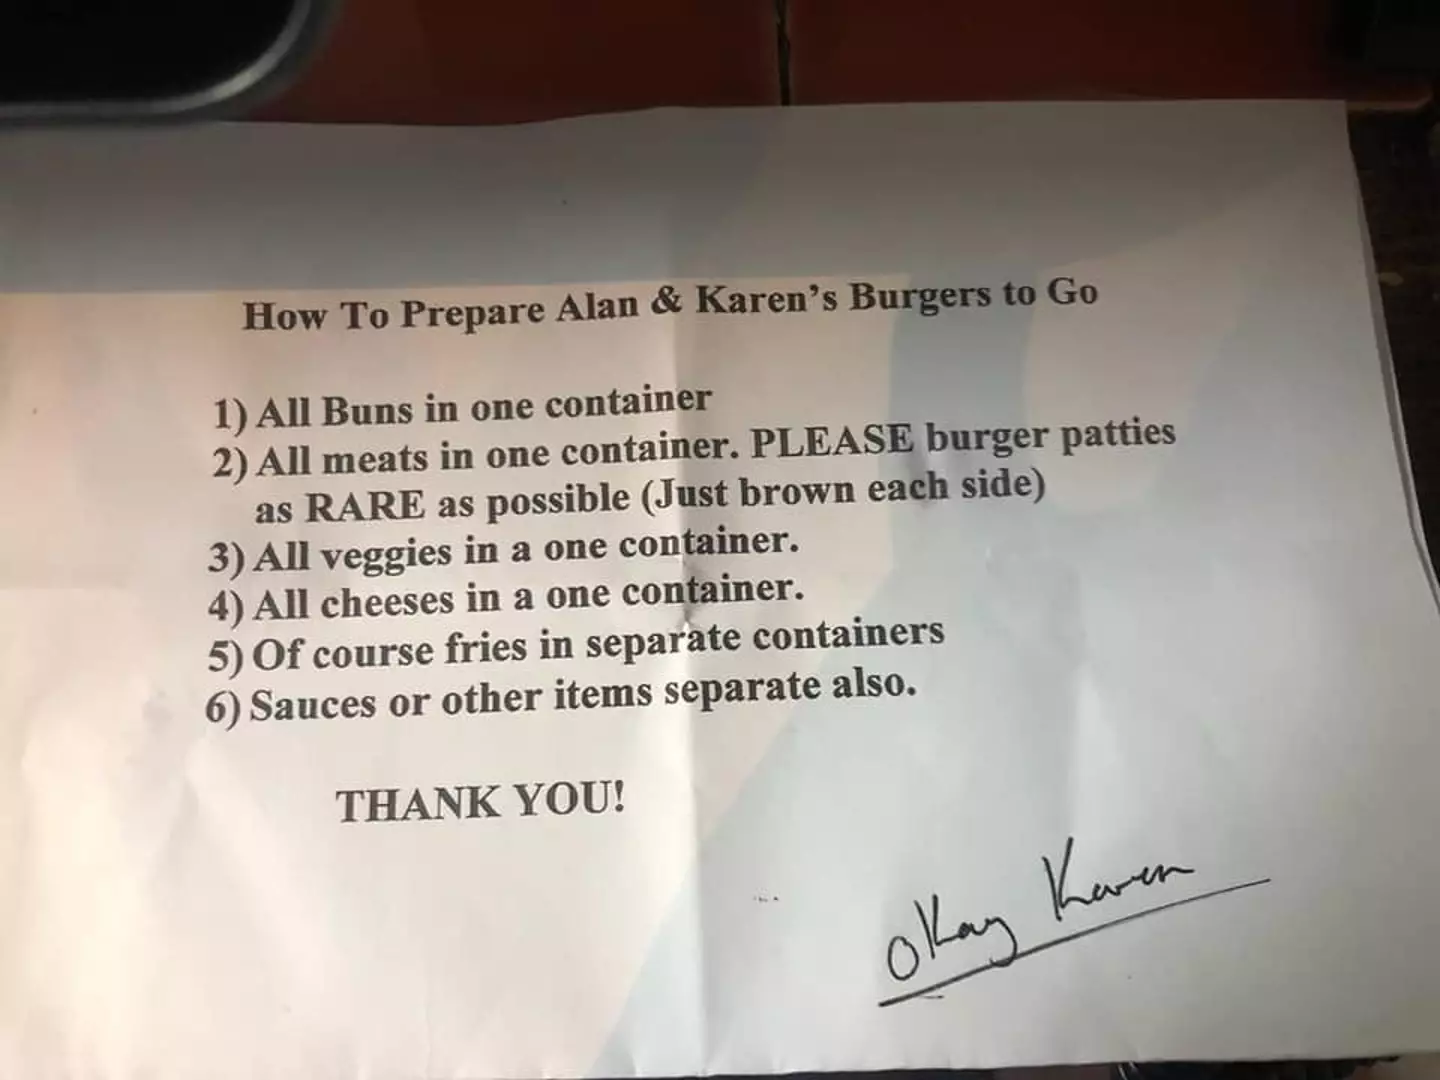 One couple sent a list of requirements for their burgers (